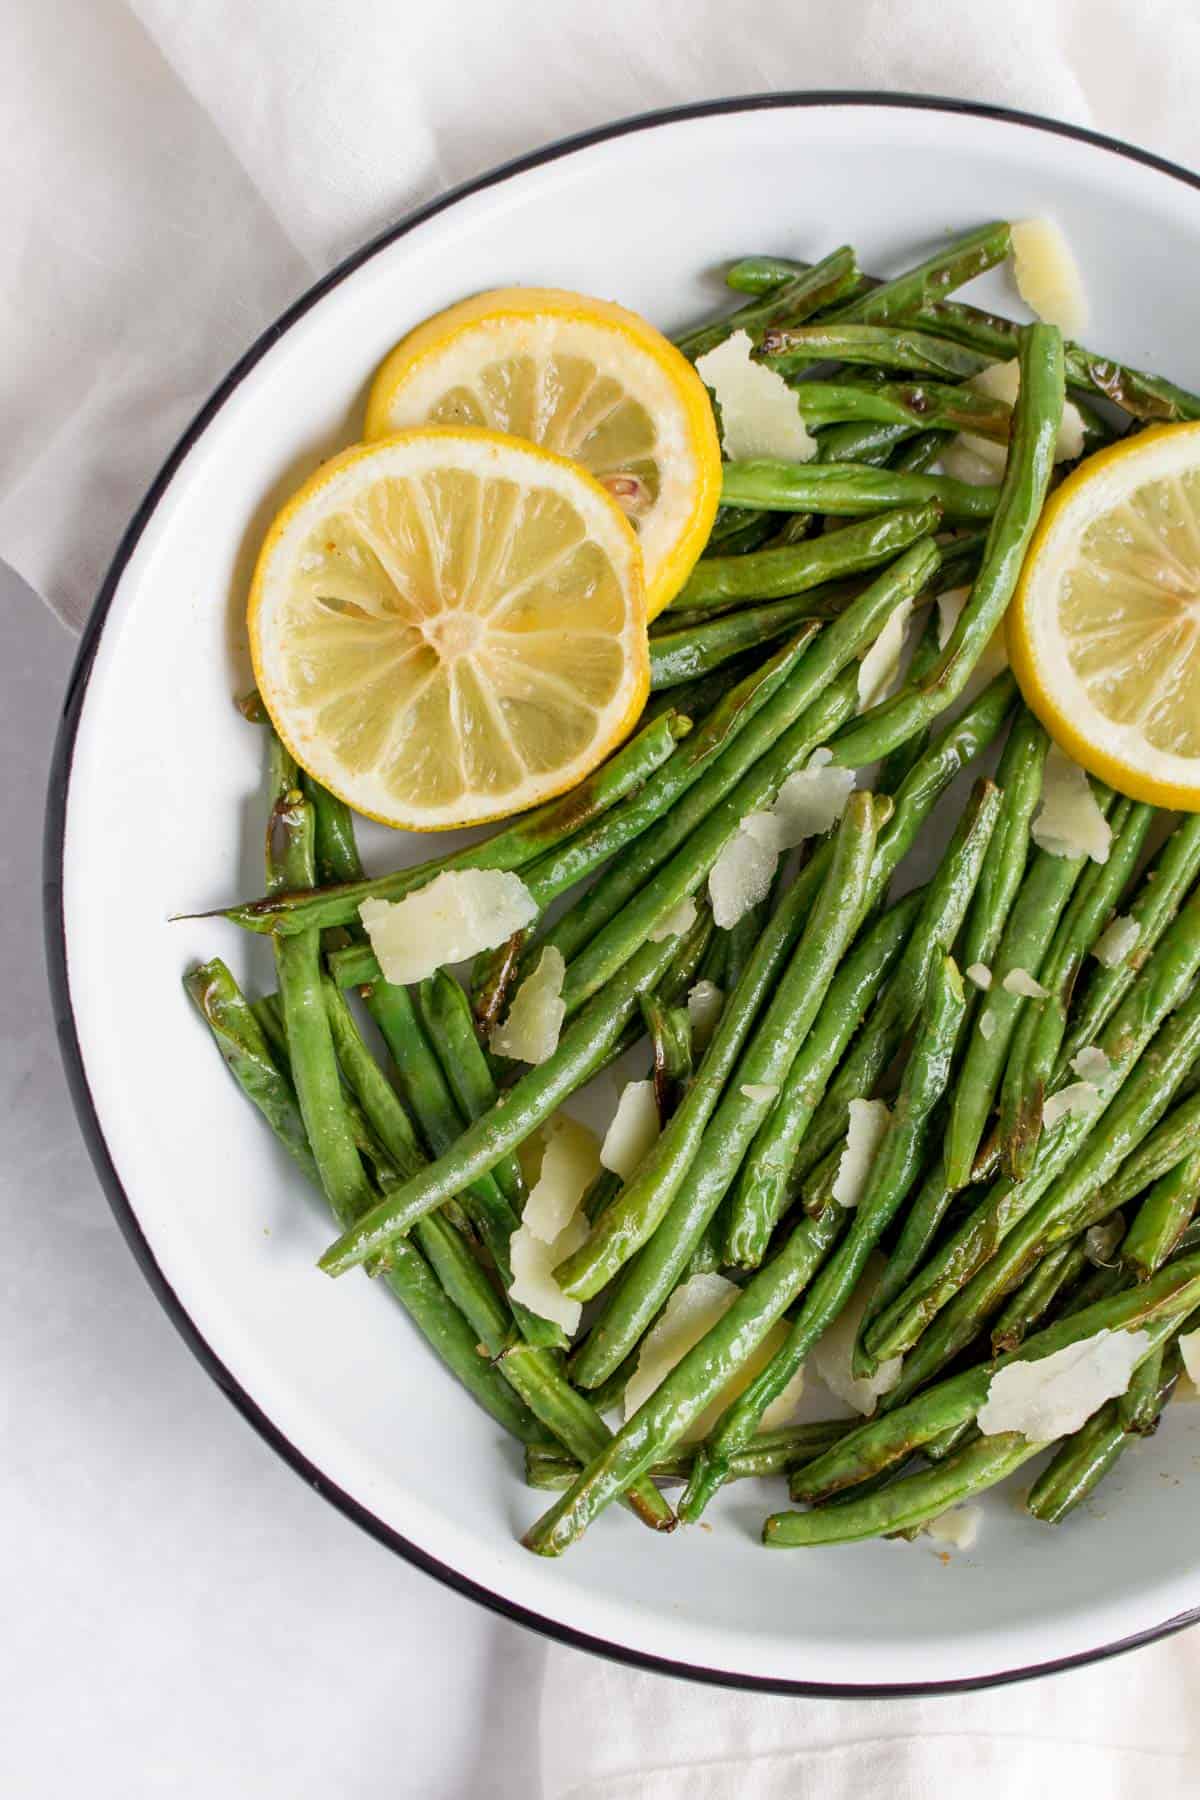 Close up image of a plate of green beans with lemon slices and parmesan with a fork and a spoon inside the plate.